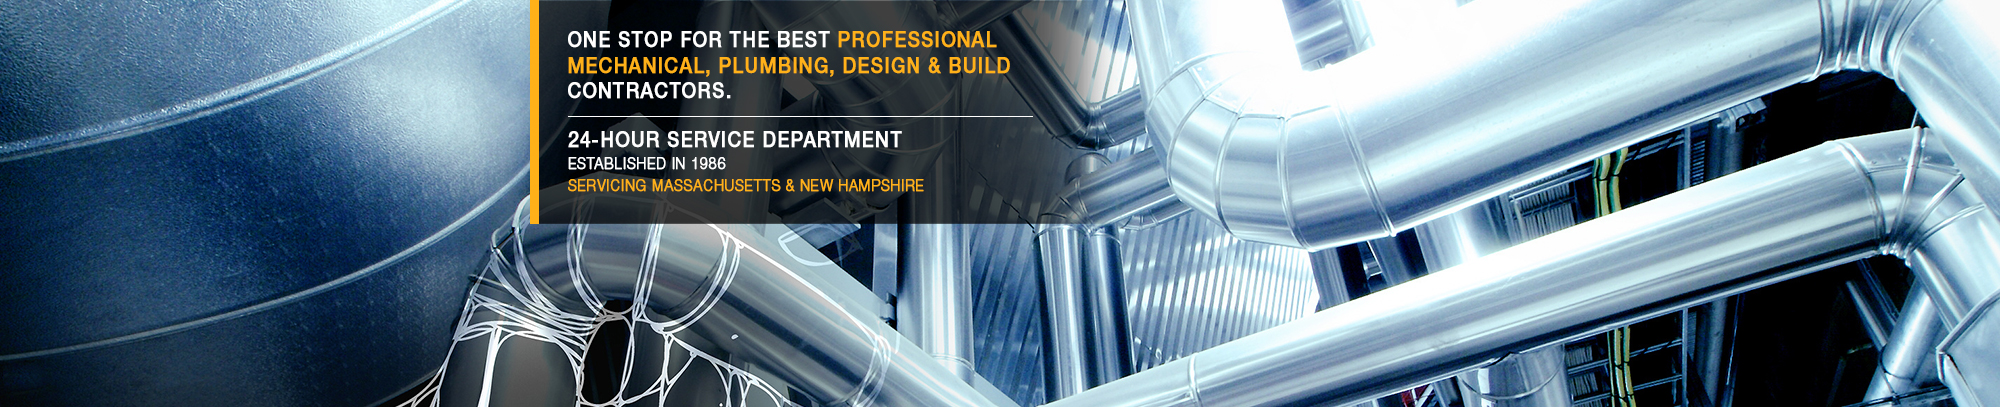 One stop for the best professional mechanical, plumbing, design & build contractors. 24-hour service department. Established in 1986. Servicing Massachusetts & New Hampshire